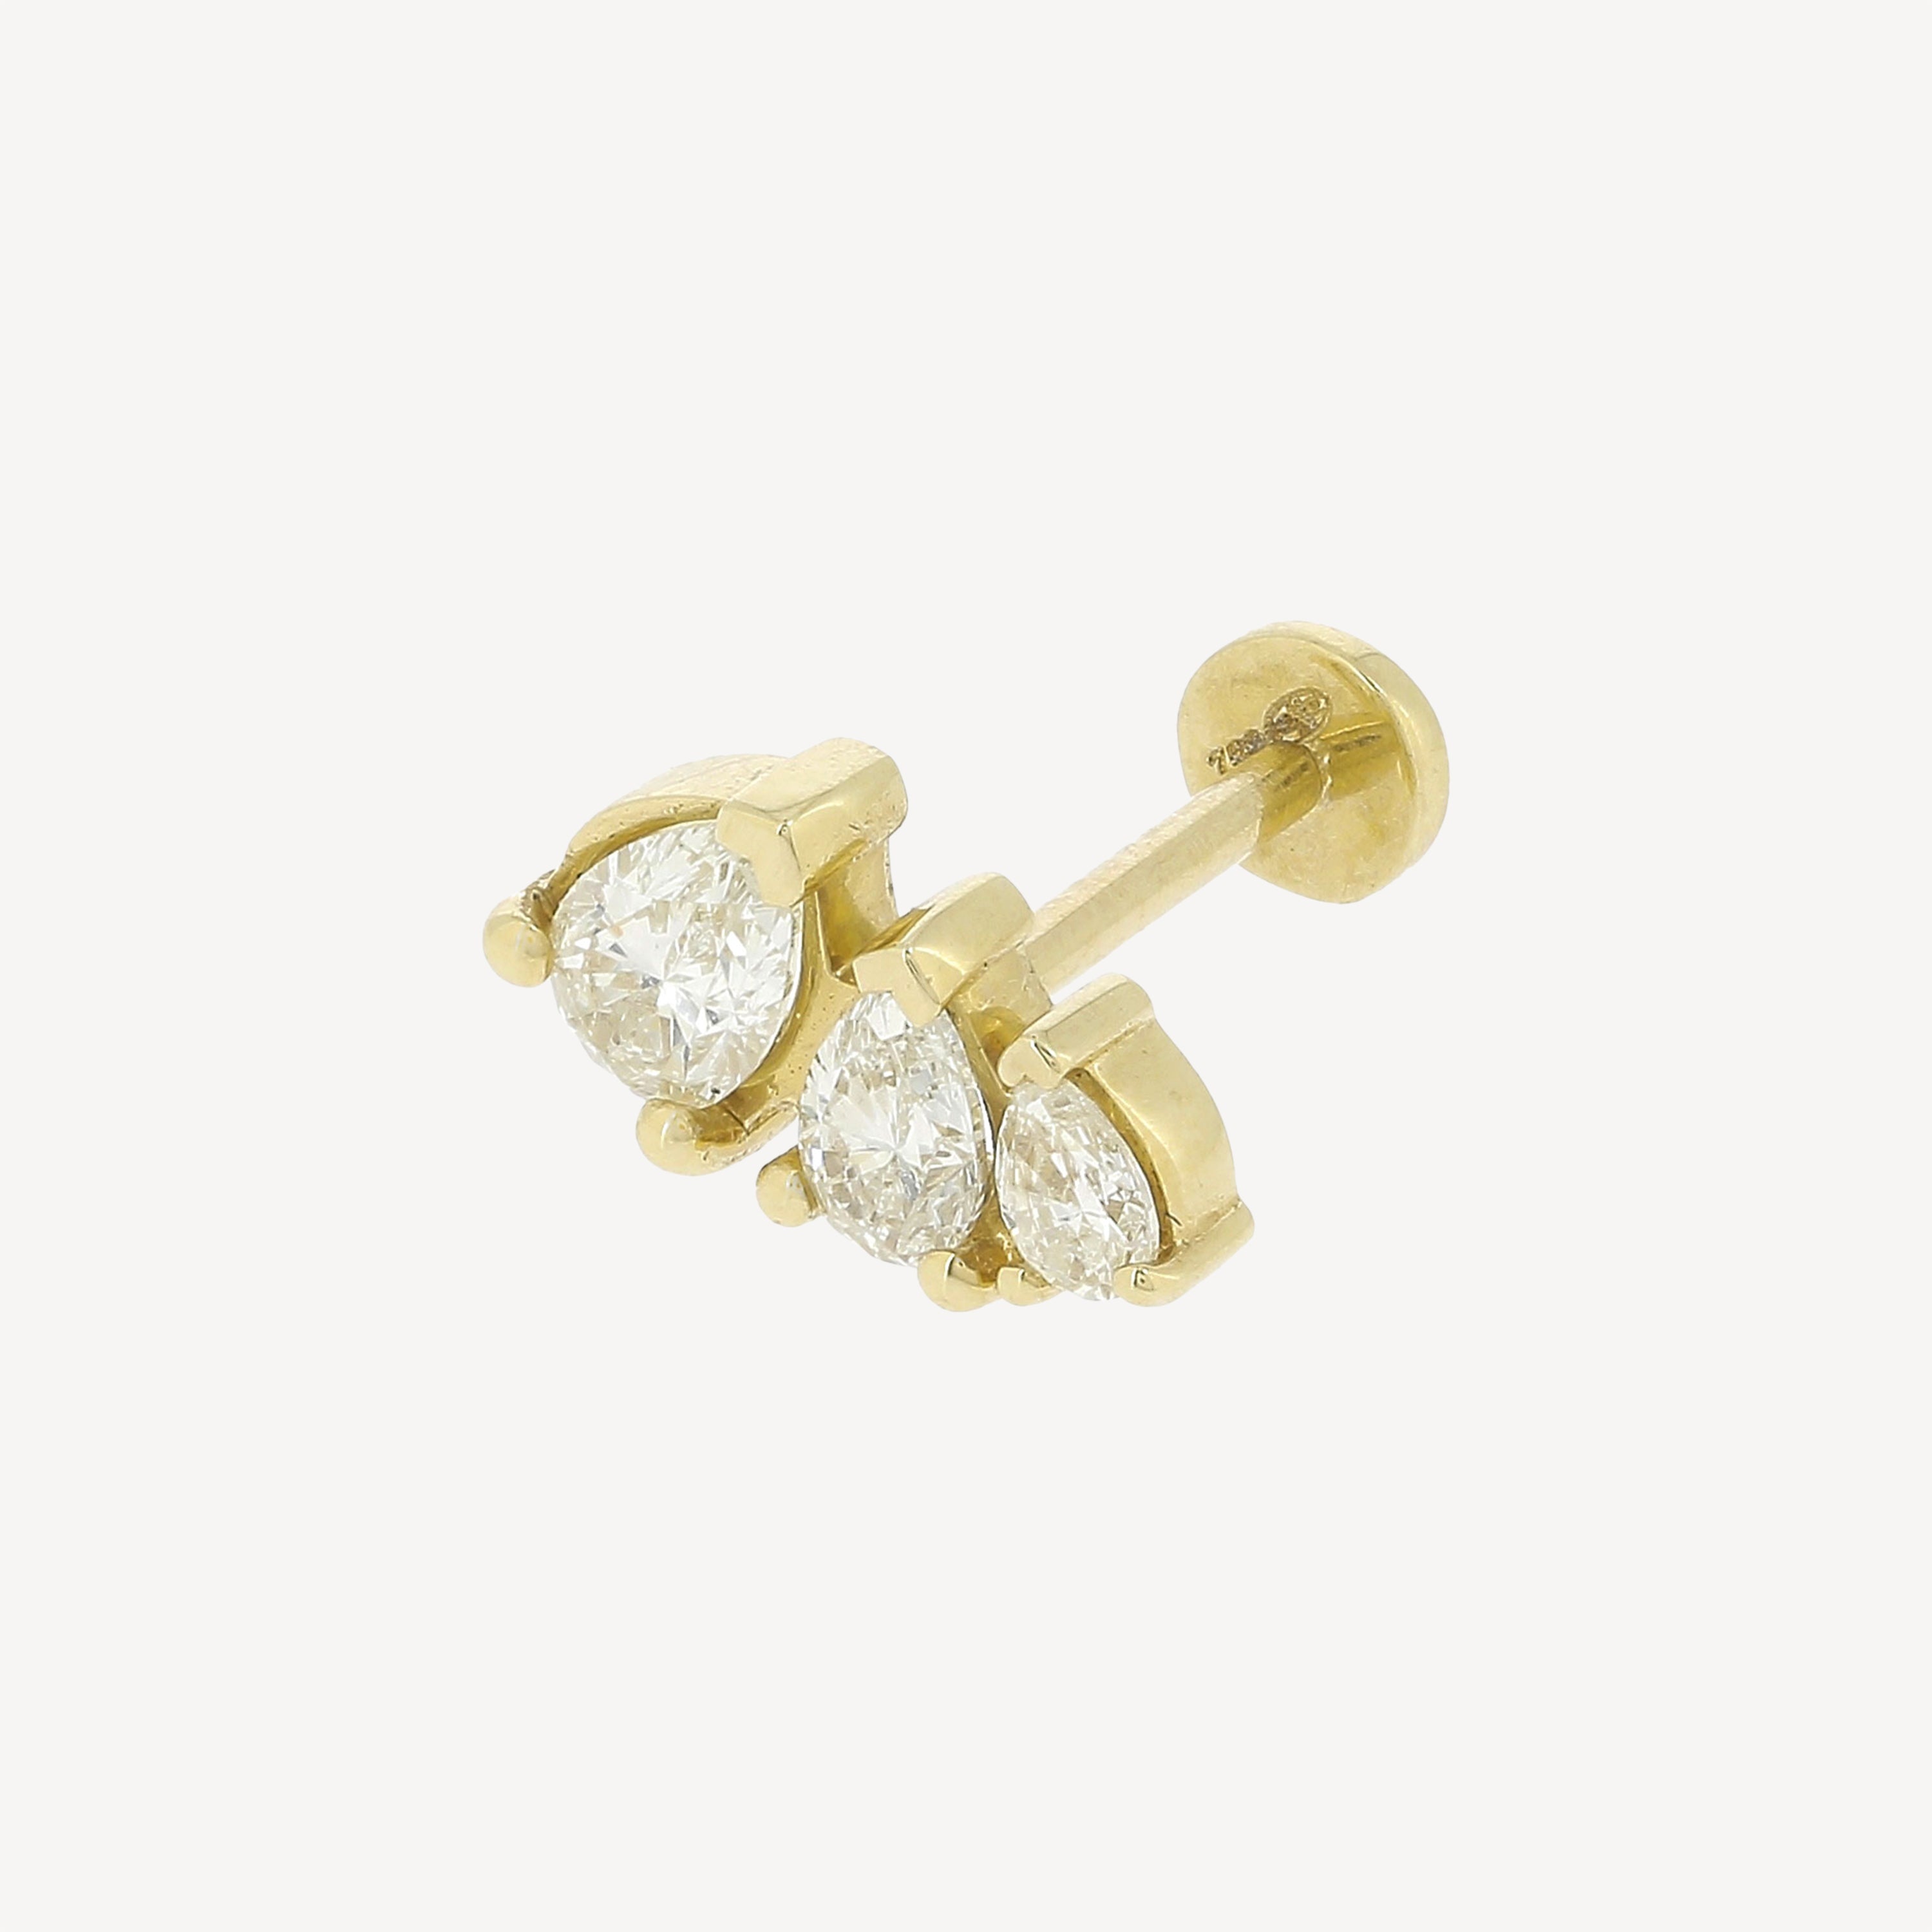 3 Degraded Pears Stud Yellow Gold